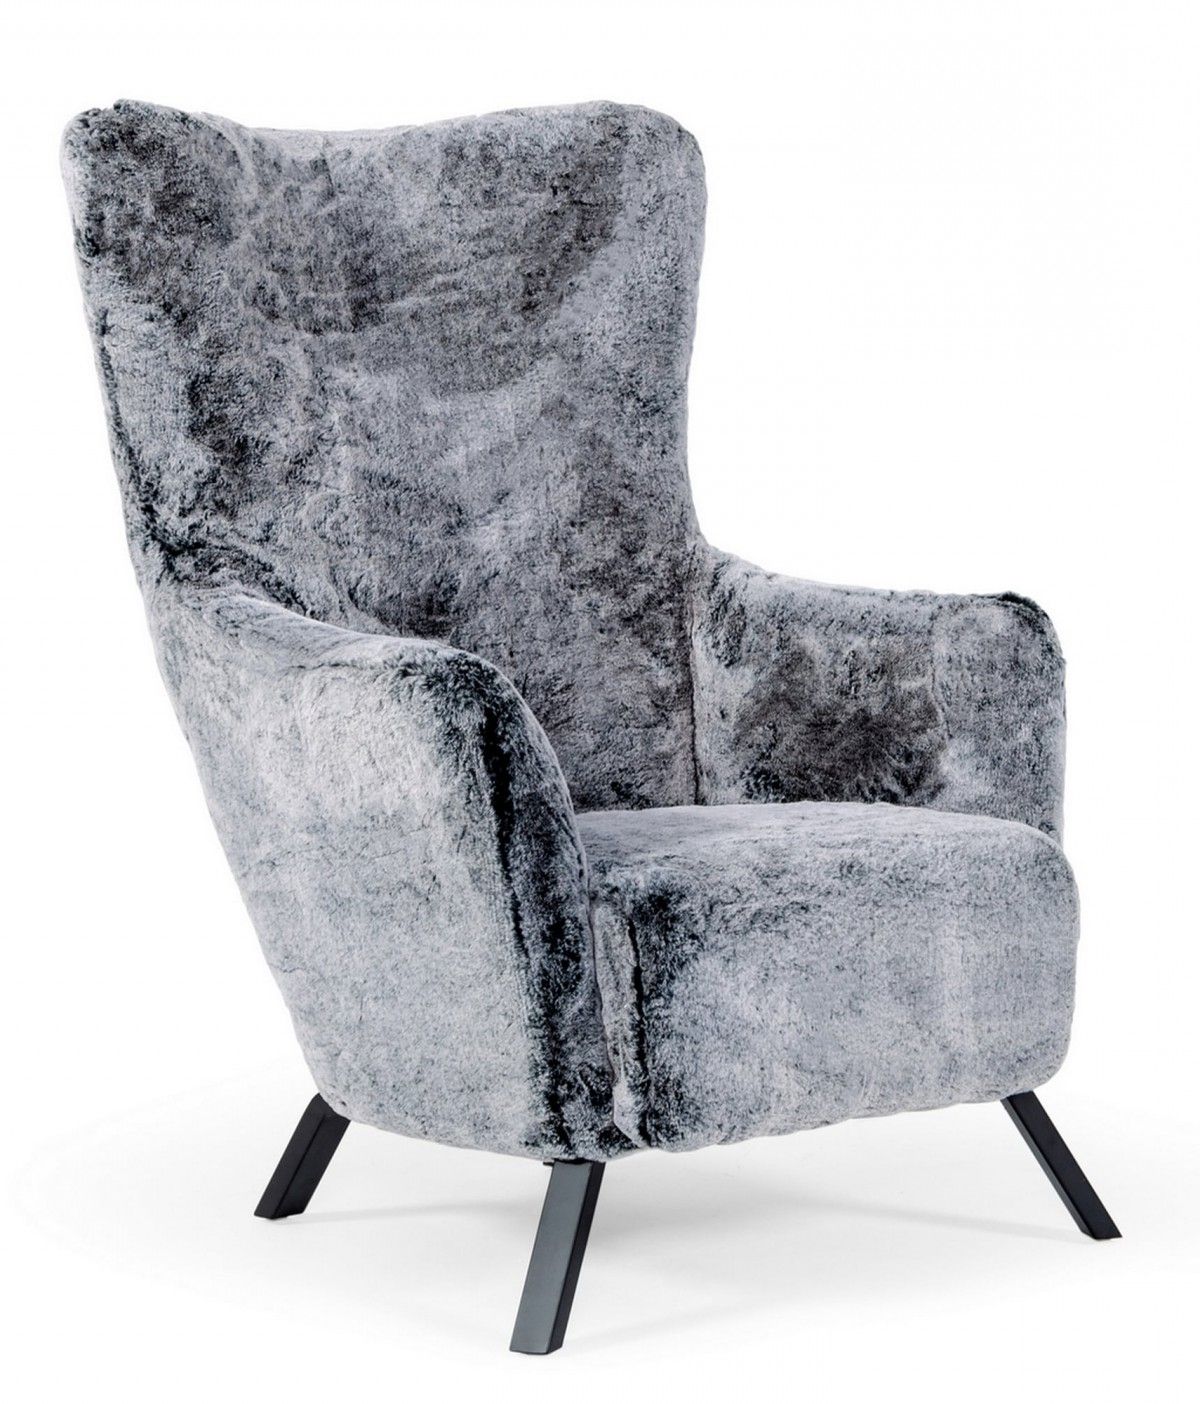 Lack Faux Fur Round Accent Stools With Storage Regarding Most Recent Modrest Findon – Glam Grey Faux Fur Accent Chair – Accent Chairs (View 2 of 10)